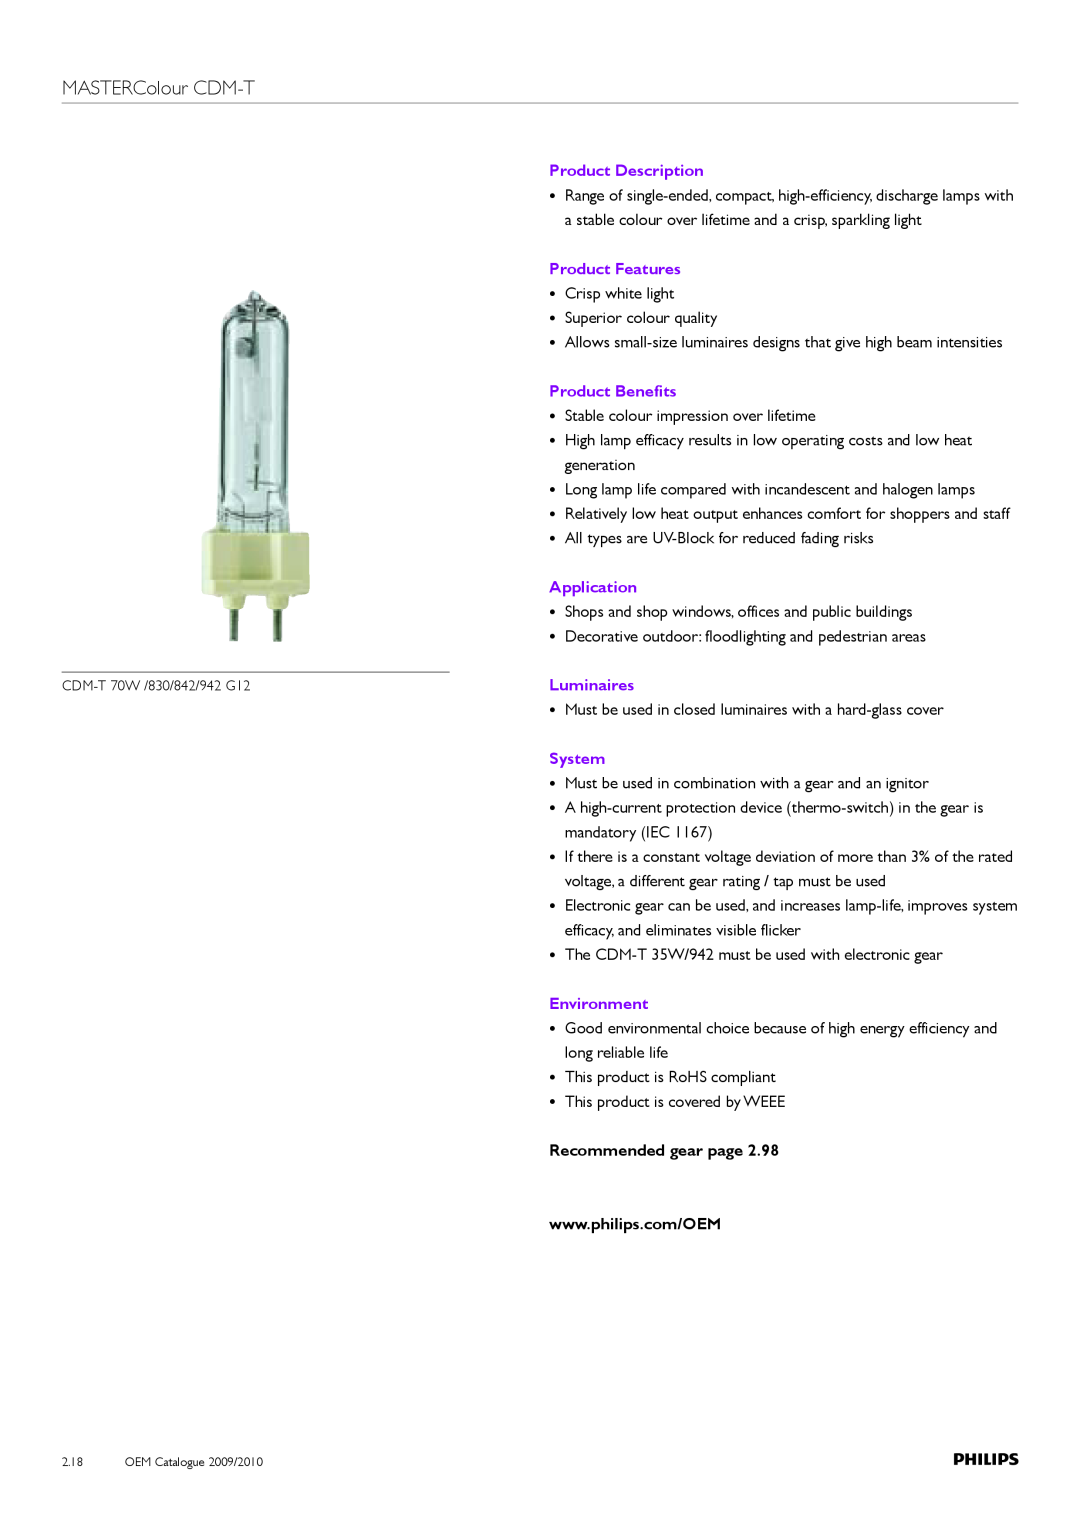 Philips Compact HID Lamp and Gear MASTERColour CDM-T, Product Description, Product Features, Product Benefits, Application 